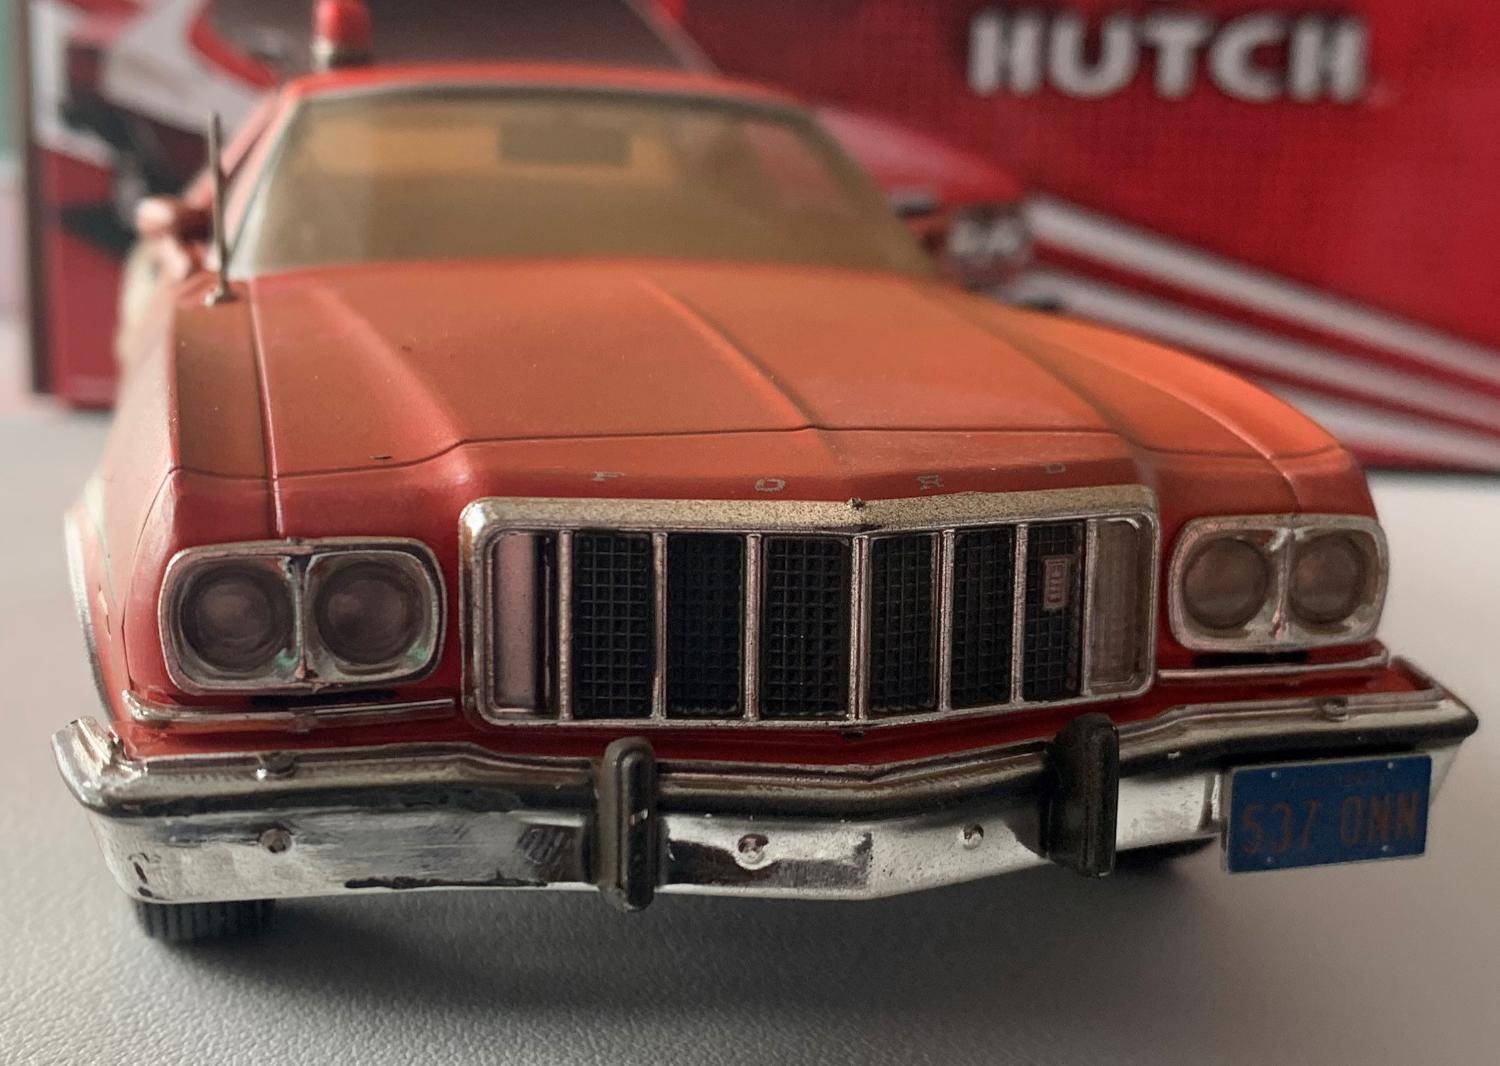 Starsky and Hutch Ford Gran Torino 1976 Weathered Version in red / white 1:24 scale model from Greenlight